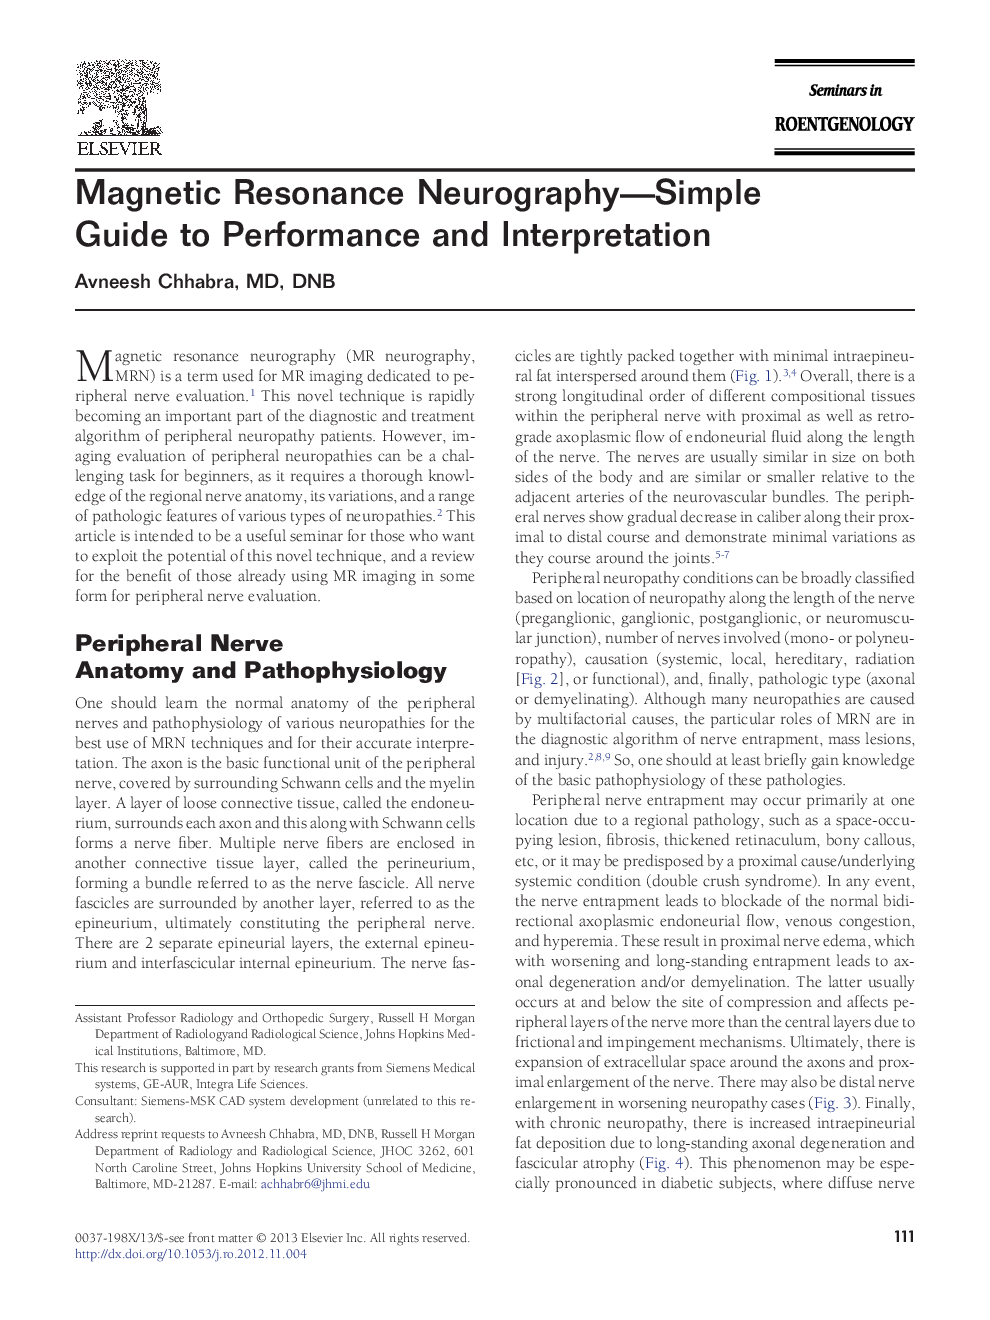 Magnetic Resonance Neurography-Simple Guide to Performance and Interpretation